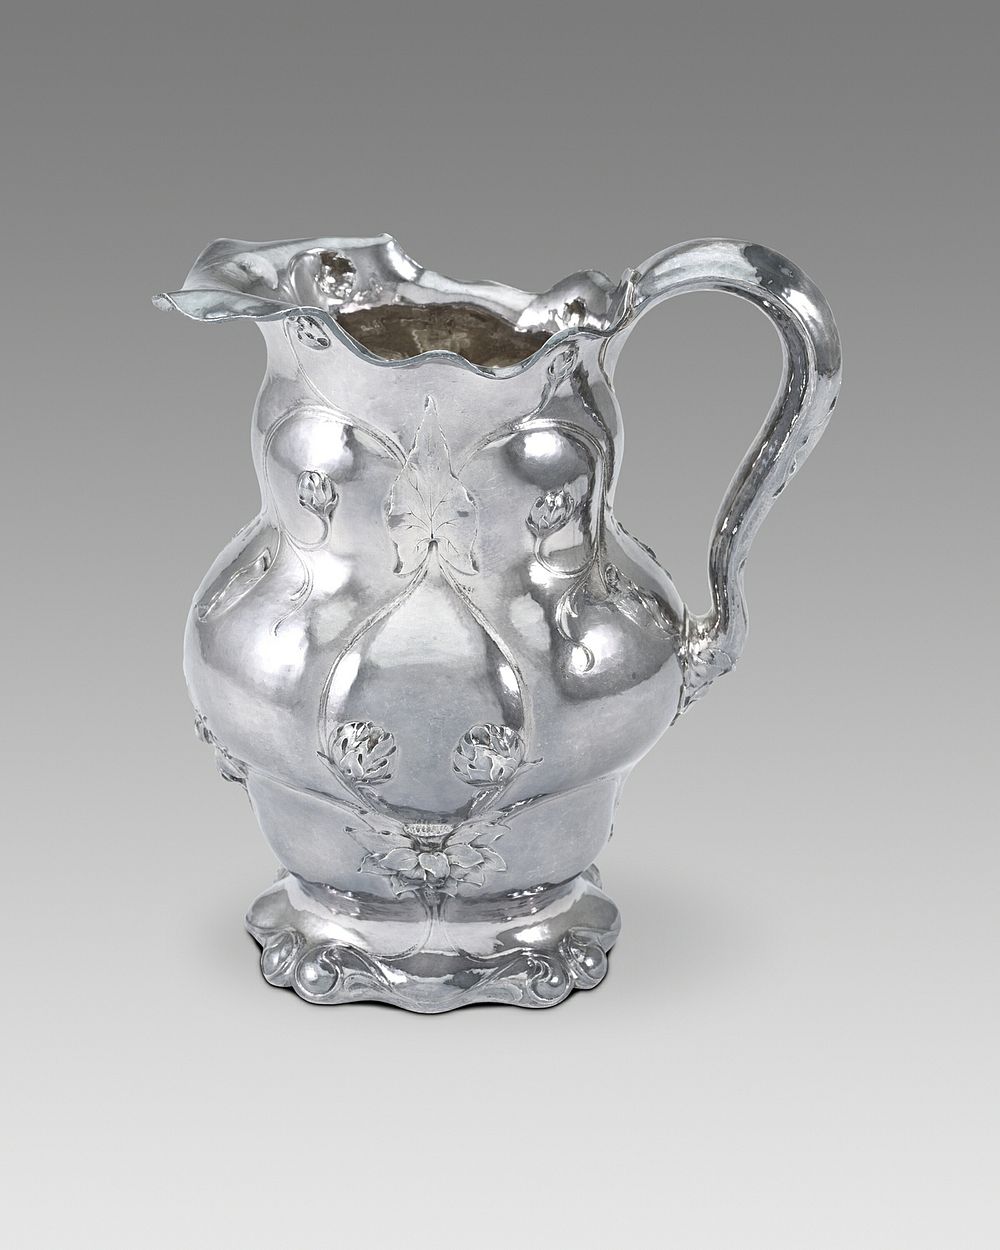 Water Pitcher (part of set with 1973.769a-g) by Gorham Manufacturing Company